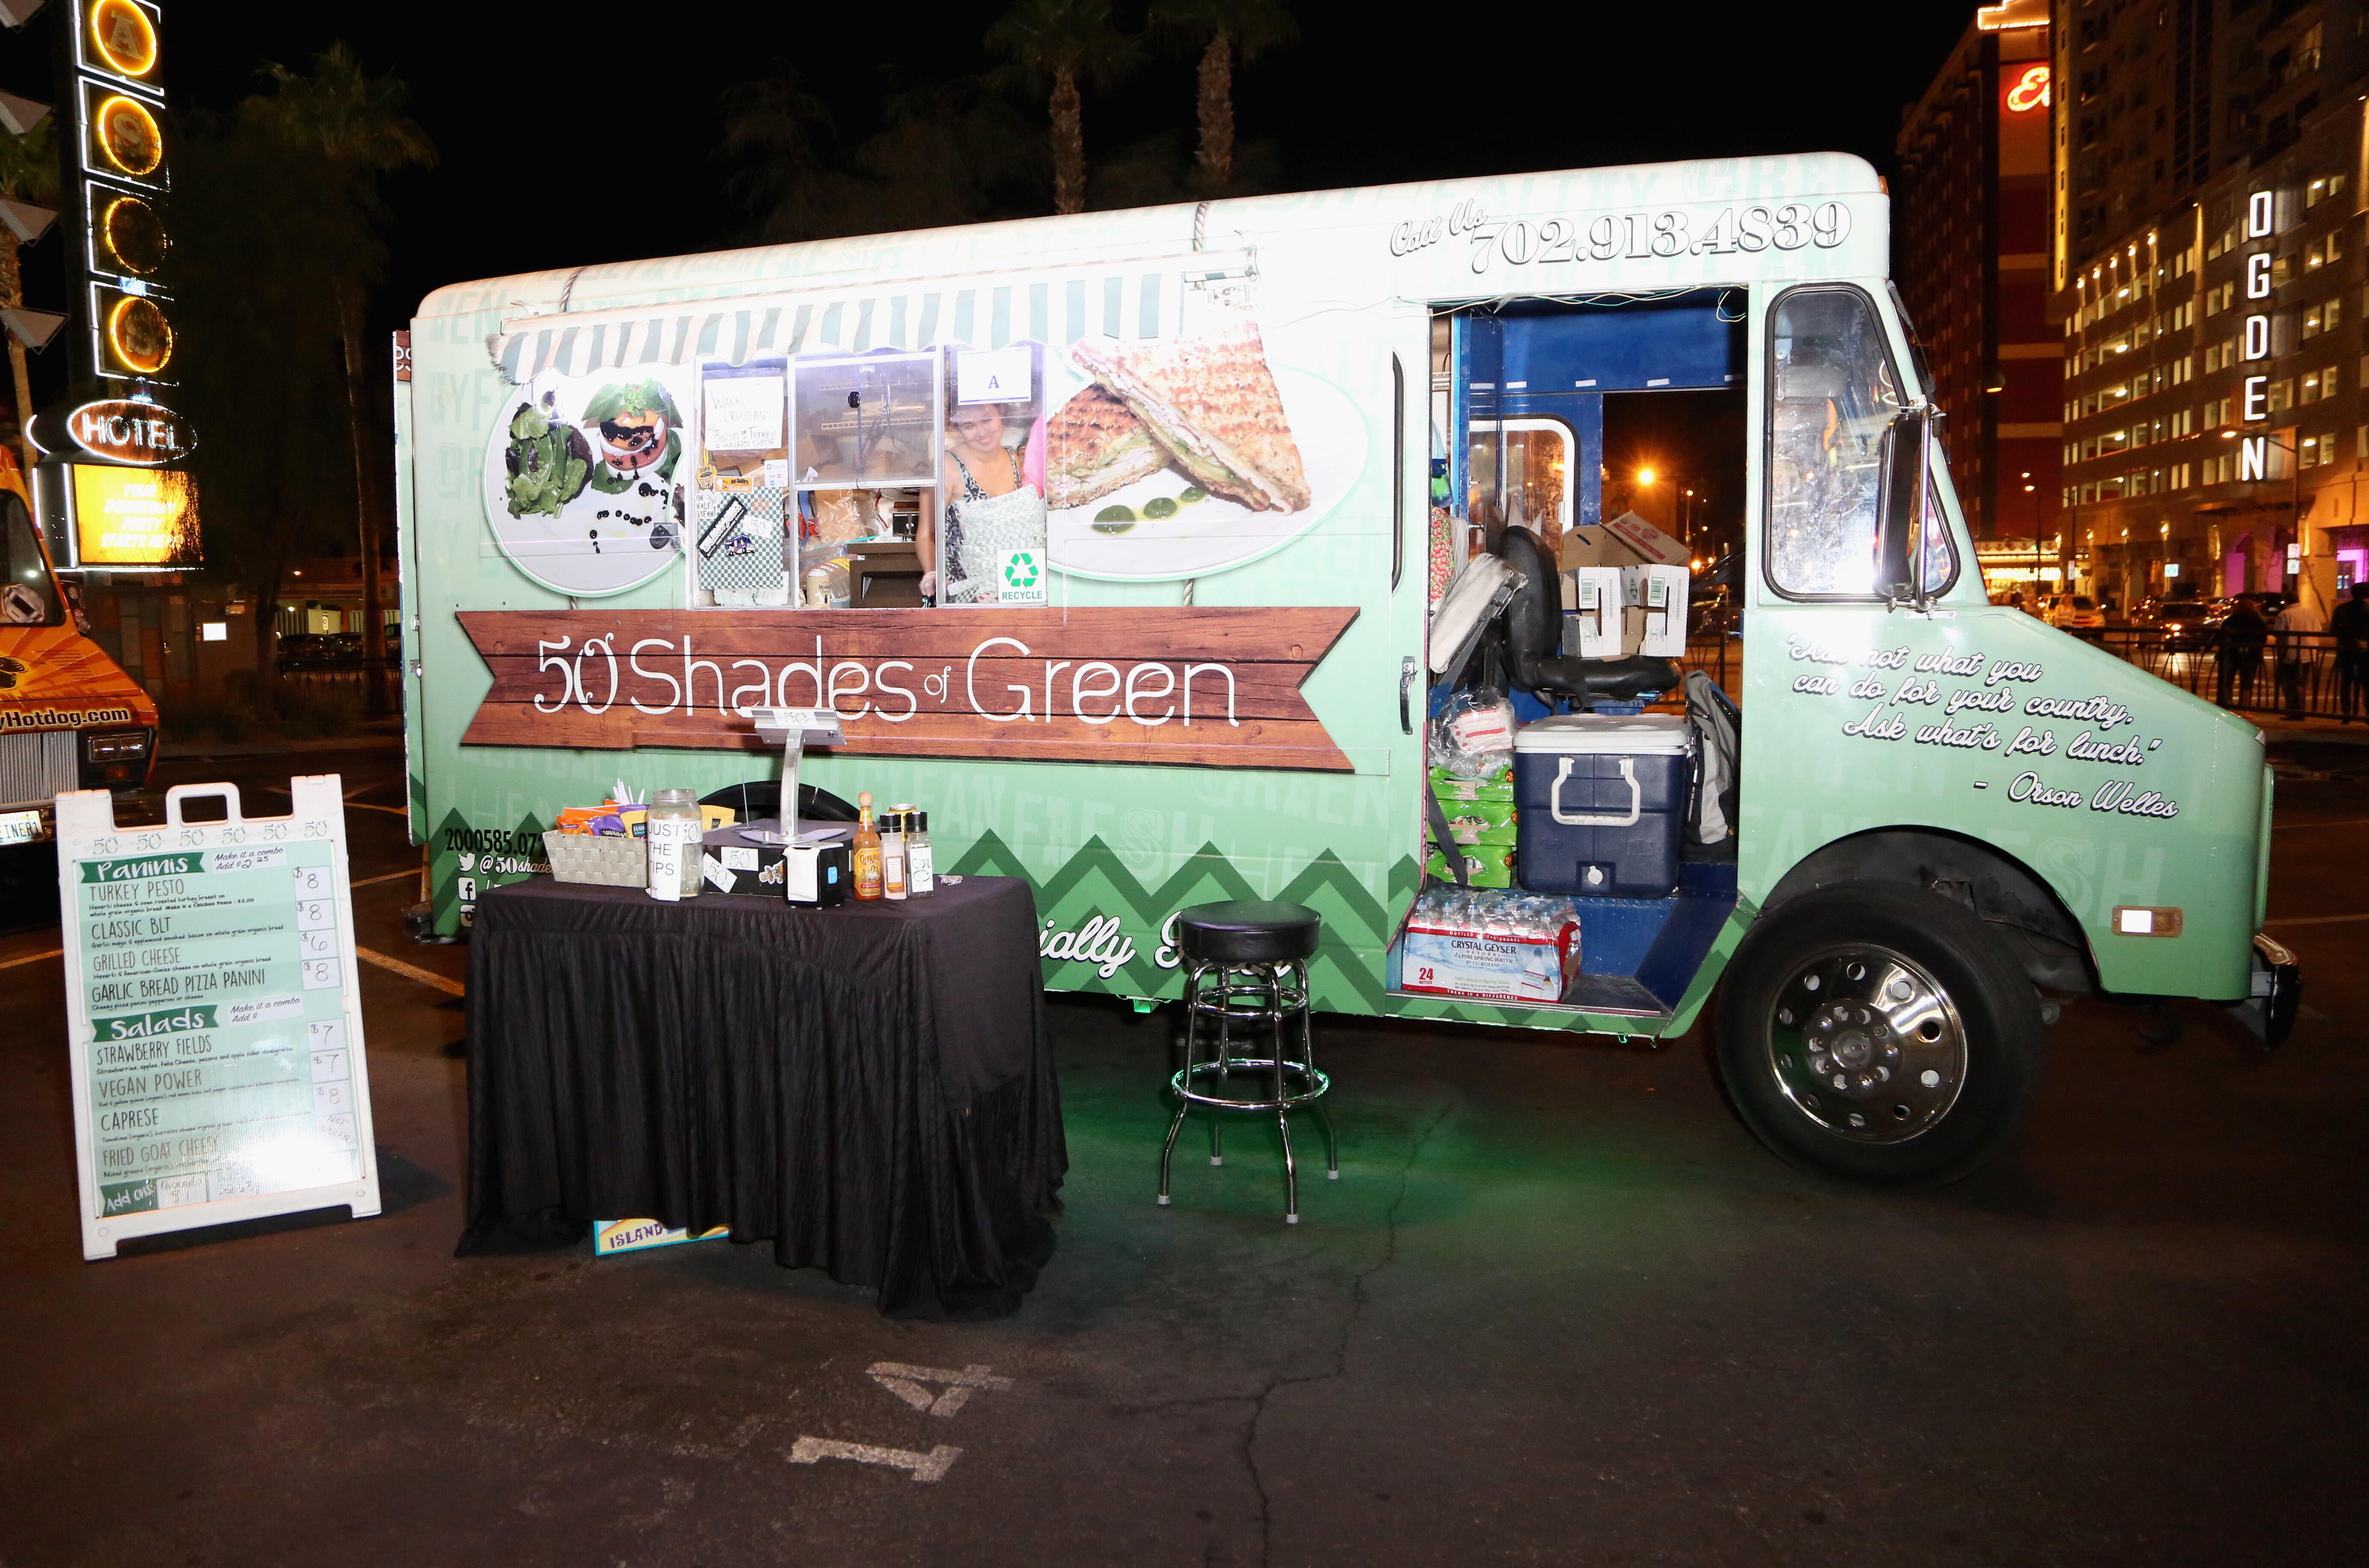 LAS VEGAS, NV - MARCH 09:  A view of food trucks during the closing night party sponsored by MillerCoors during the 31st annual Nightclub & Bar Convention and Trade Show at the Gold Spike Hotel & Casino on March 9, 2016 in Las Vegas, Nevada.  on March 9, 